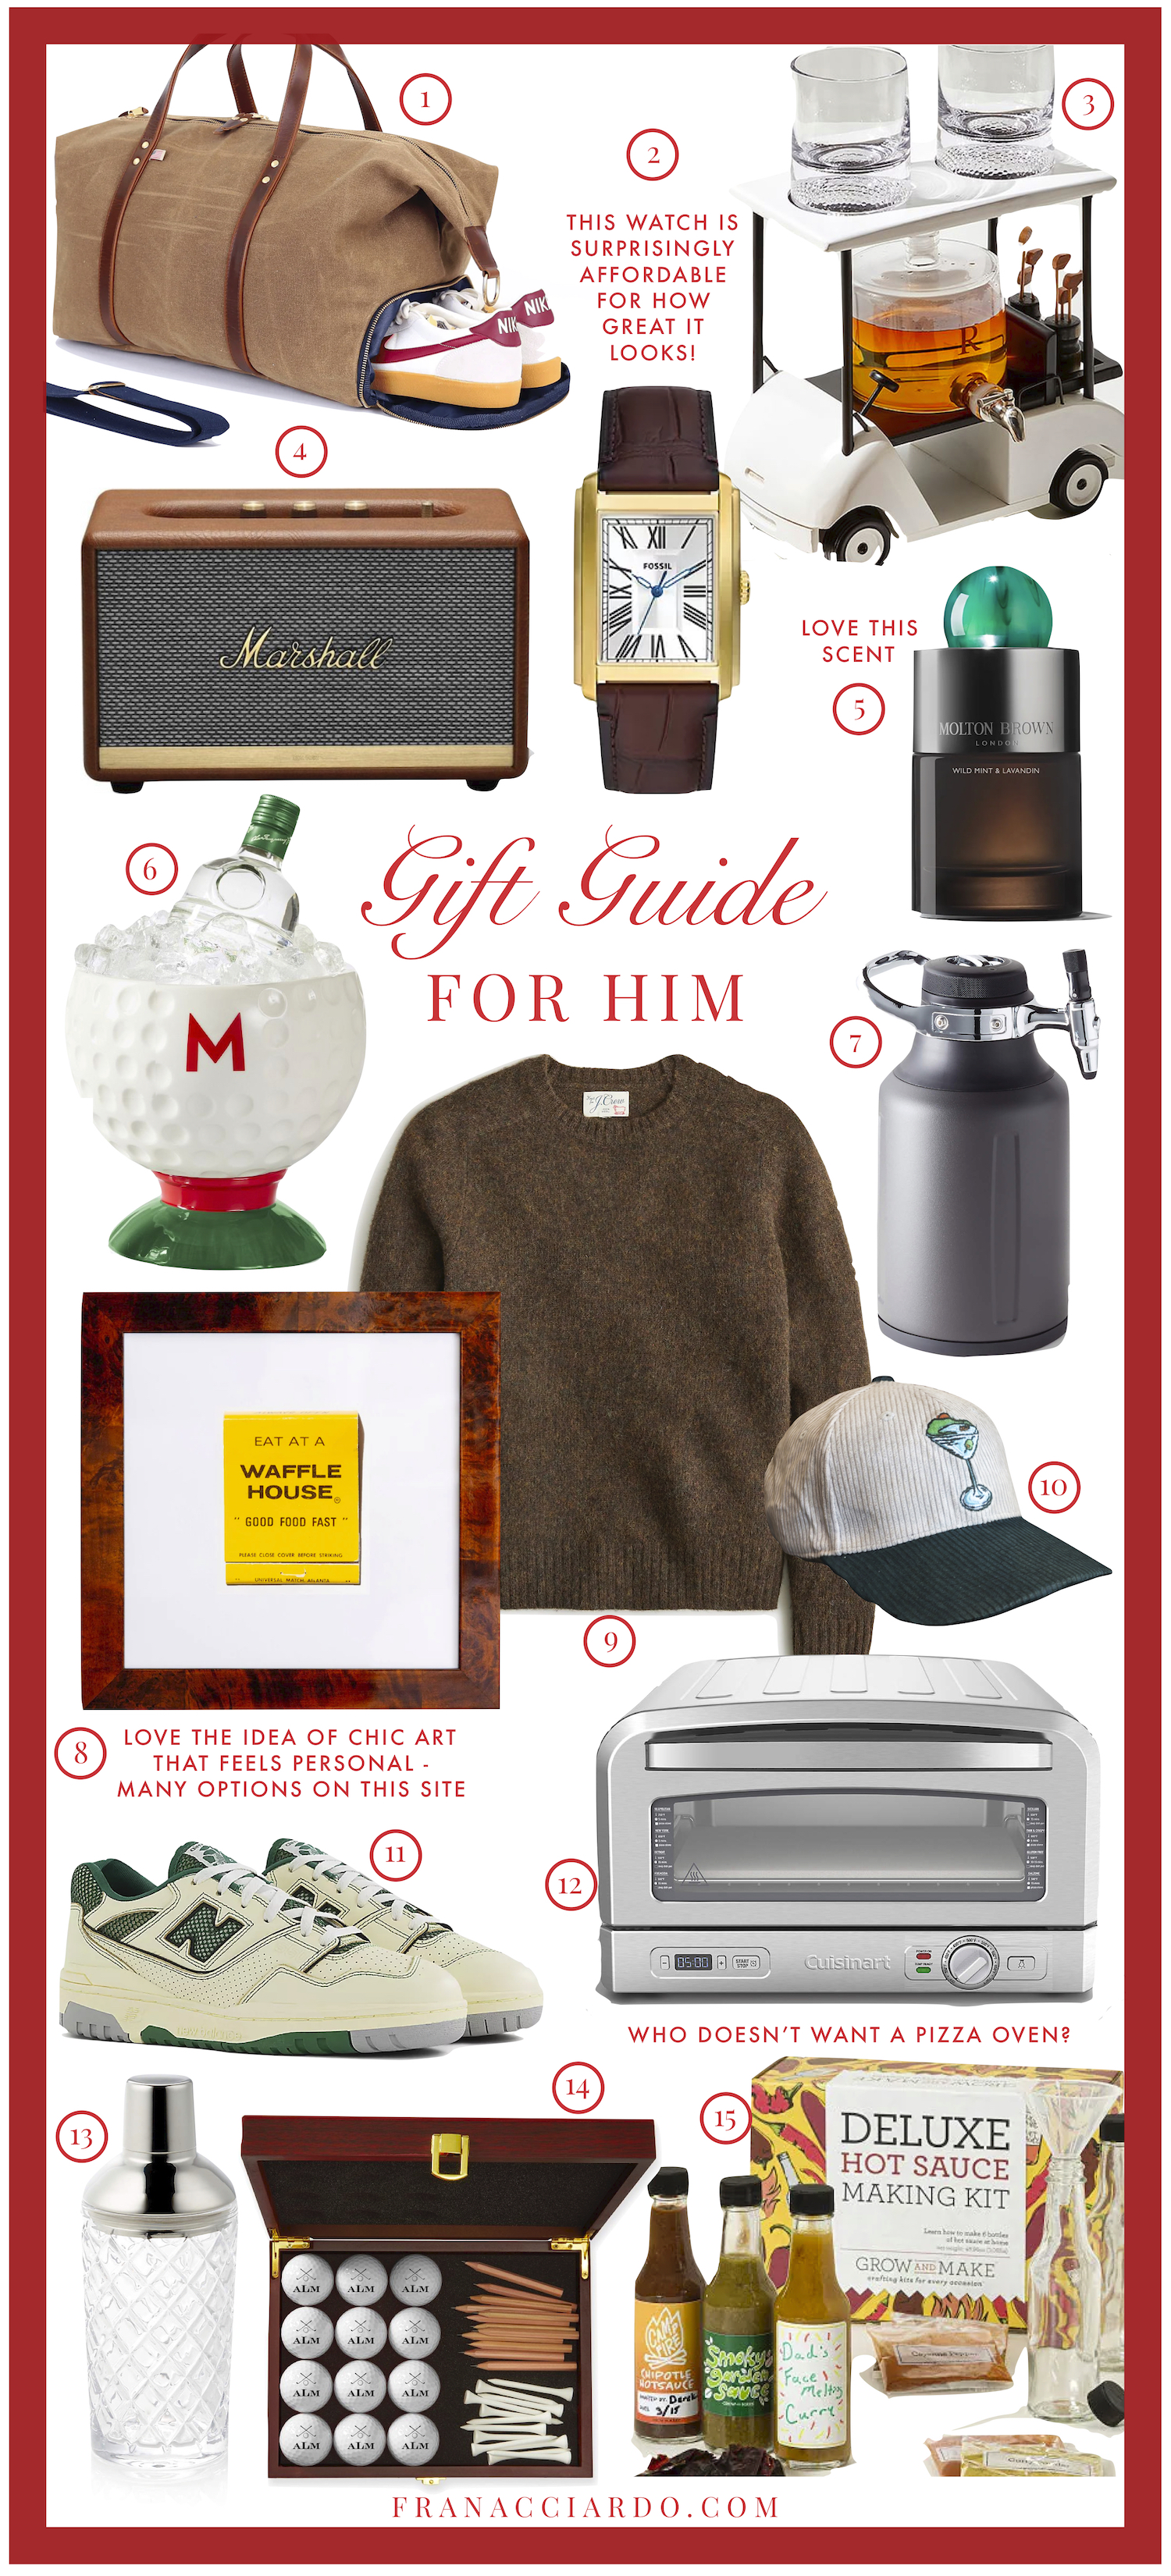 2023 Gift Guide: For Him - Fran Acciardo Gift Ideas for Guys, Dad, Brother, Boyfriend gift guide